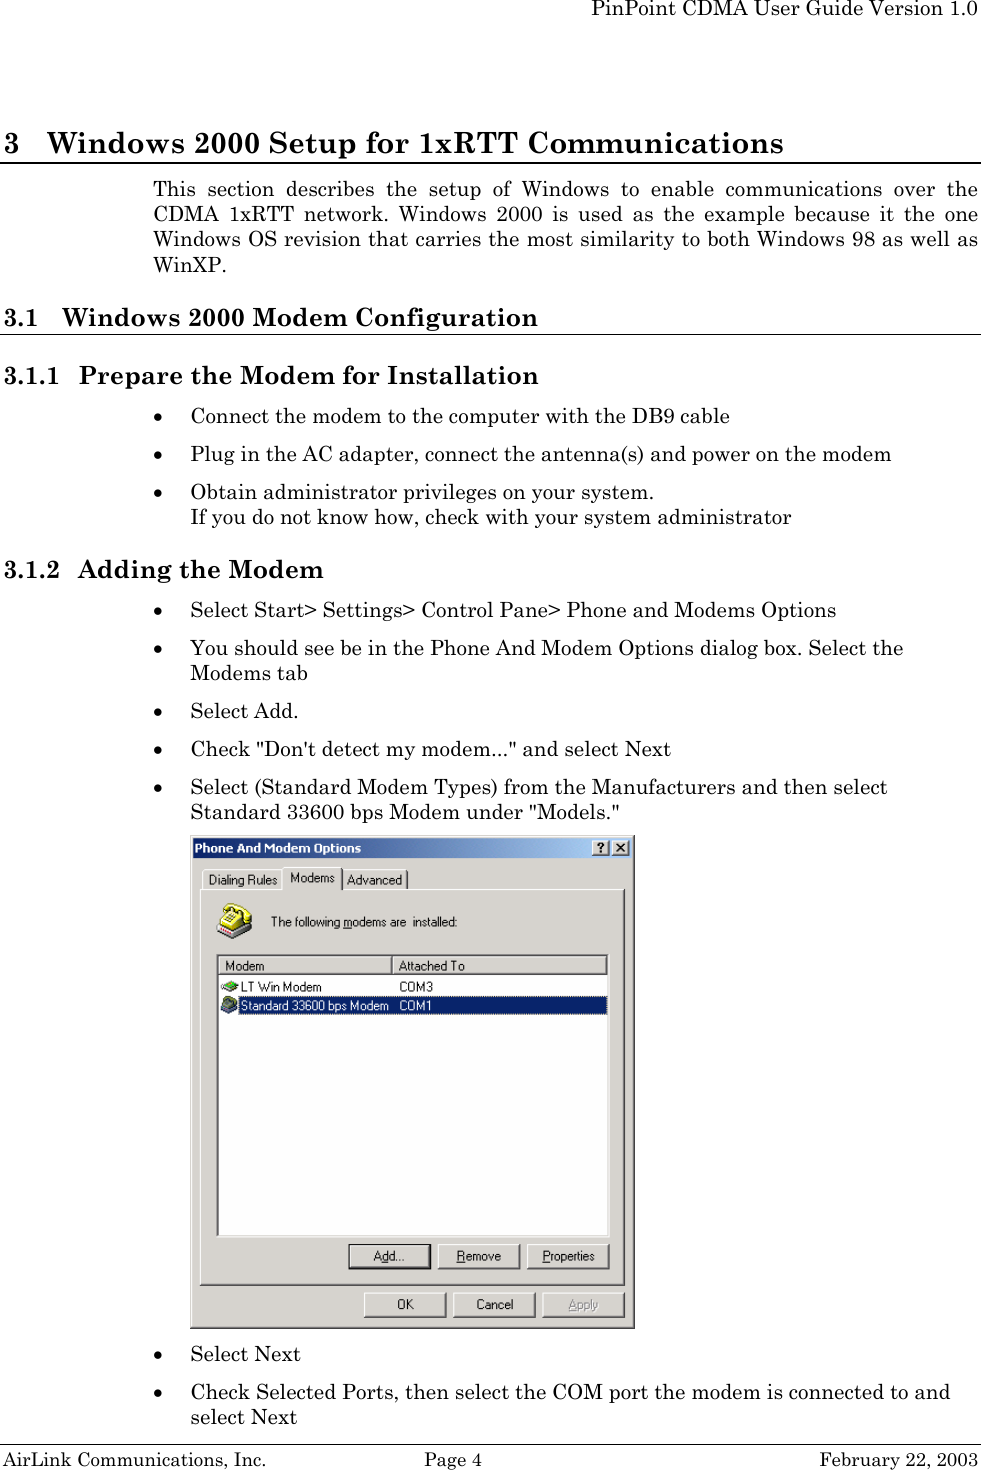   PinPoint CDMA User Guide Version 1.0   AirLink Communications, Inc.  Page 4  February 22, 2003 3 Windows 2000 Setup for 1xRTT Communications This section describes the setup of Windows to enable communications over the CDMA 1xRTT network. Windows 2000 is used as the example because it the one Windows OS revision that carries the most similarity to both Windows 98 as well as WinXP.  3.1 Windows 2000 Modem Configuration  3.1.1 Prepare the Modem for Installation • Connect the modem to the computer with the DB9 cable • Plug in the AC adapter, connect the antenna(s) and power on the modem • Obtain administrator privileges on your system.  If you do not know how, check with your system administrator 3.1.2 Adding the Modem • Select Start&gt; Settings&gt; Control Pane&gt; Phone and Modems Options • You should see be in the Phone And Modem Options dialog box. Select the Modems tab • Select Add. • Check &quot;Don&apos;t detect my modem...&quot; and select Next • Select (Standard Modem Types) from the Manufacturers and then select Standard 33600 bps Modem under &quot;Models.&quot; • Select Next • Check Selected Ports, then select the COM port the modem is connected to and select Next 